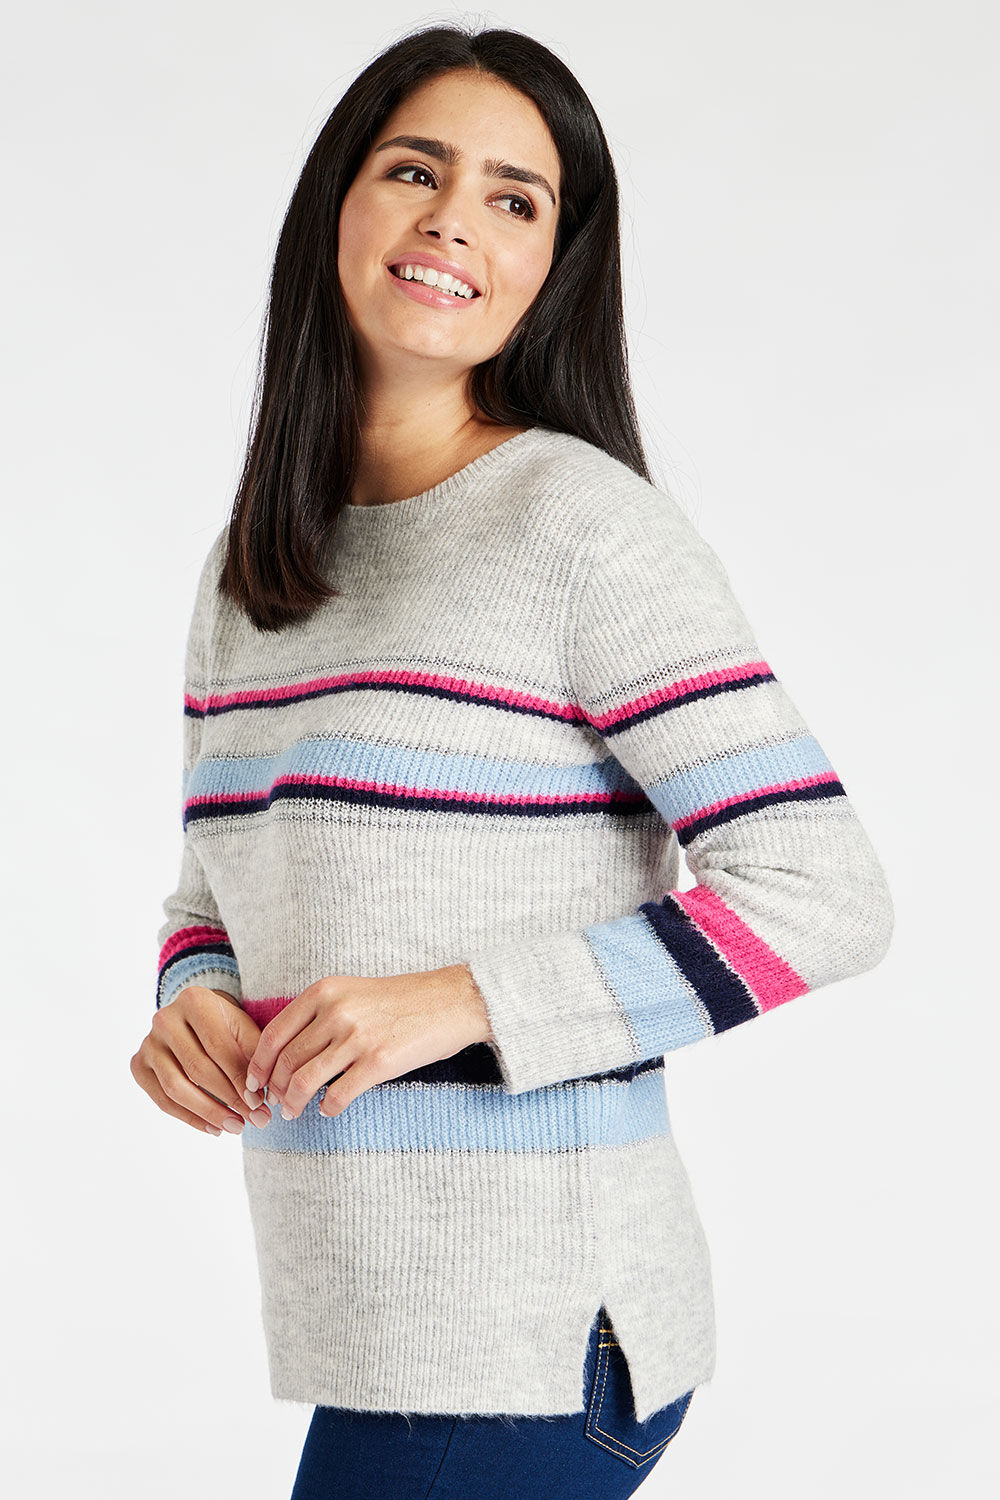 Bonmarche Women’s Grey, Pink and Blue Acrylic Striped Jumper, Size: 14